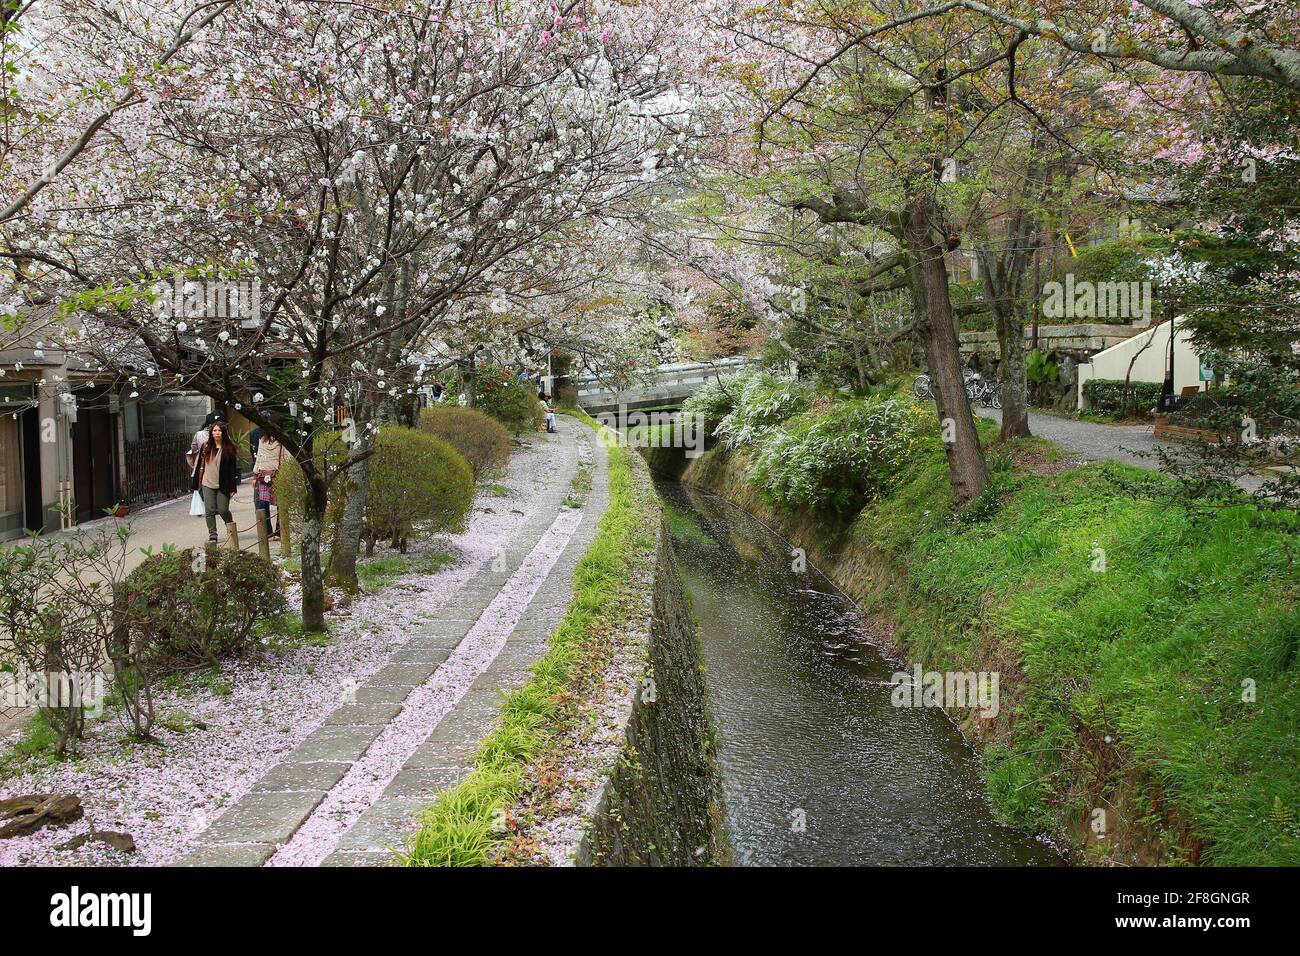 KYOTO, JAPAN - APRIL 16, 2012: People visit Philosopher's Walk (or Philosopher's Path) in Kyoto, Japan. The cherry blossom lined trail is a major Japa Stock Photo